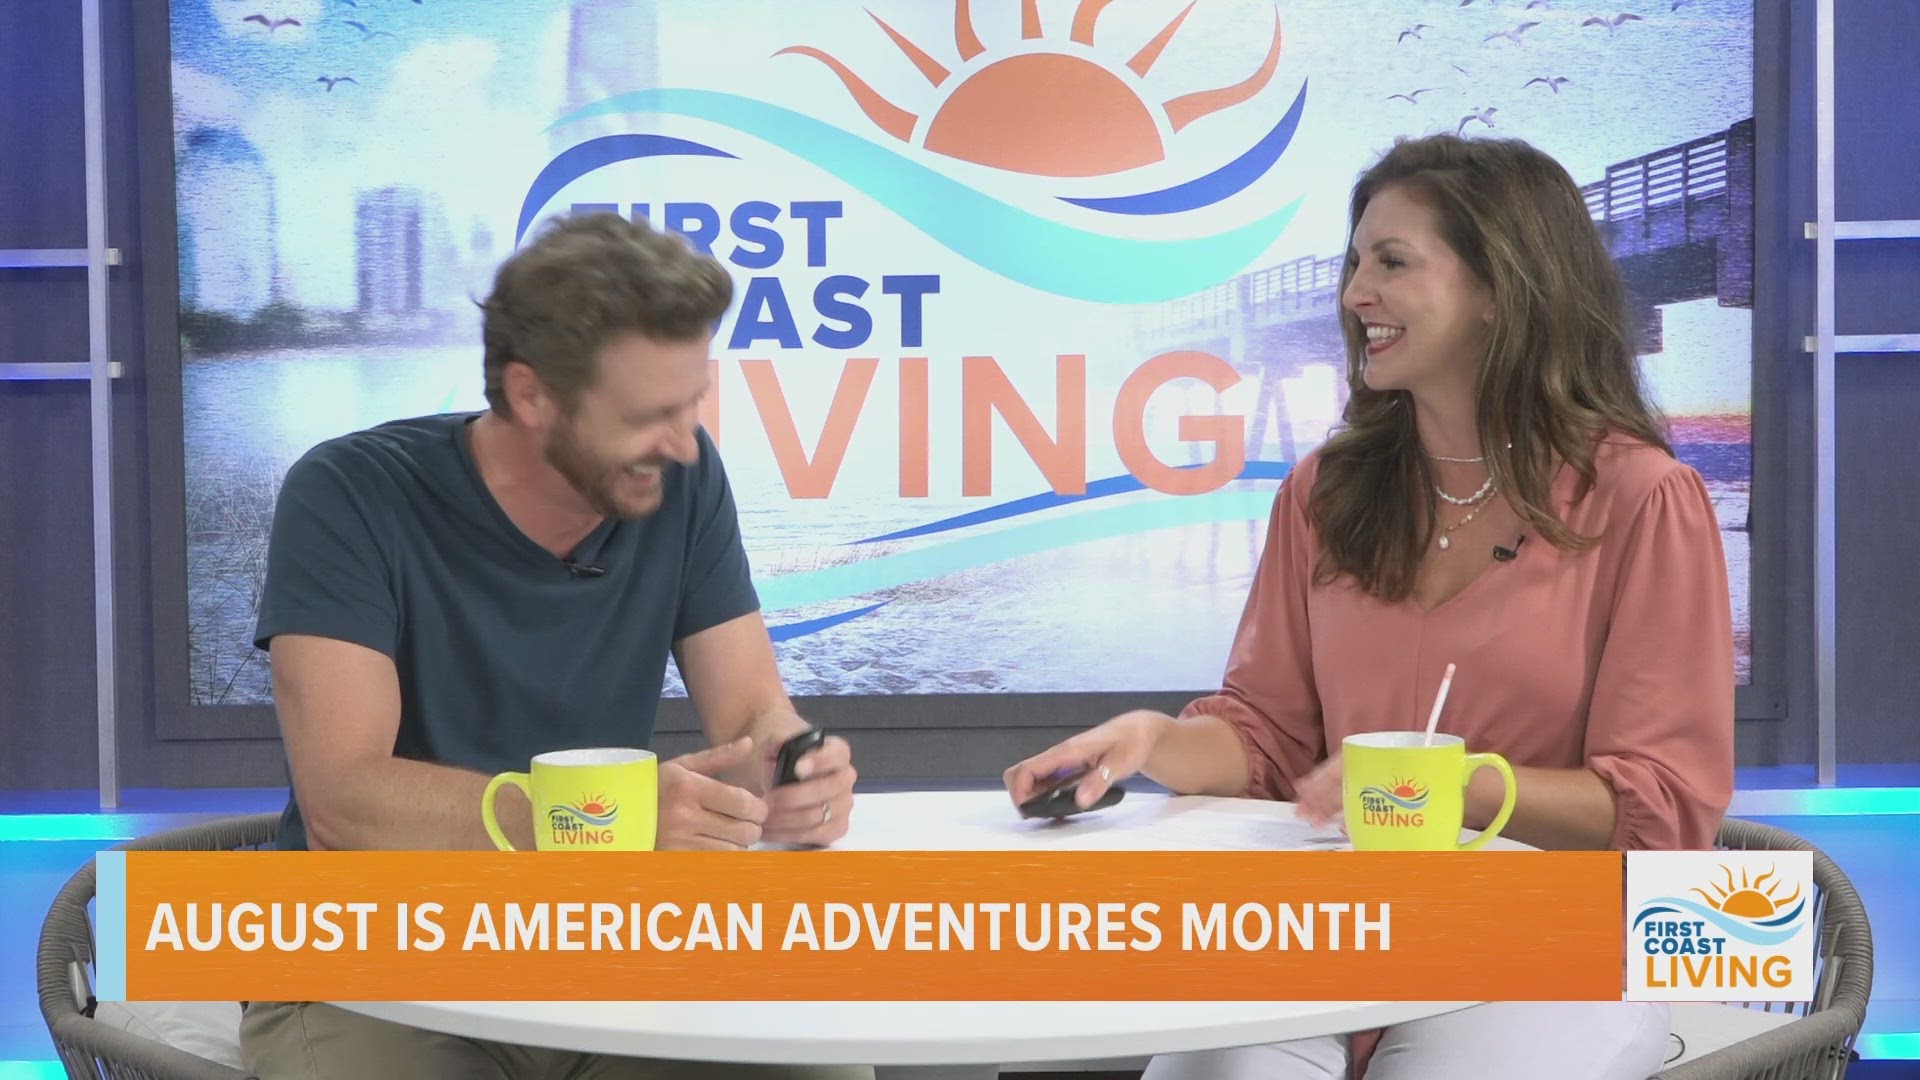 David and Jordan talk about their favorite adventure destinations - Plus some sharks who got into trouble off the Florida coast.